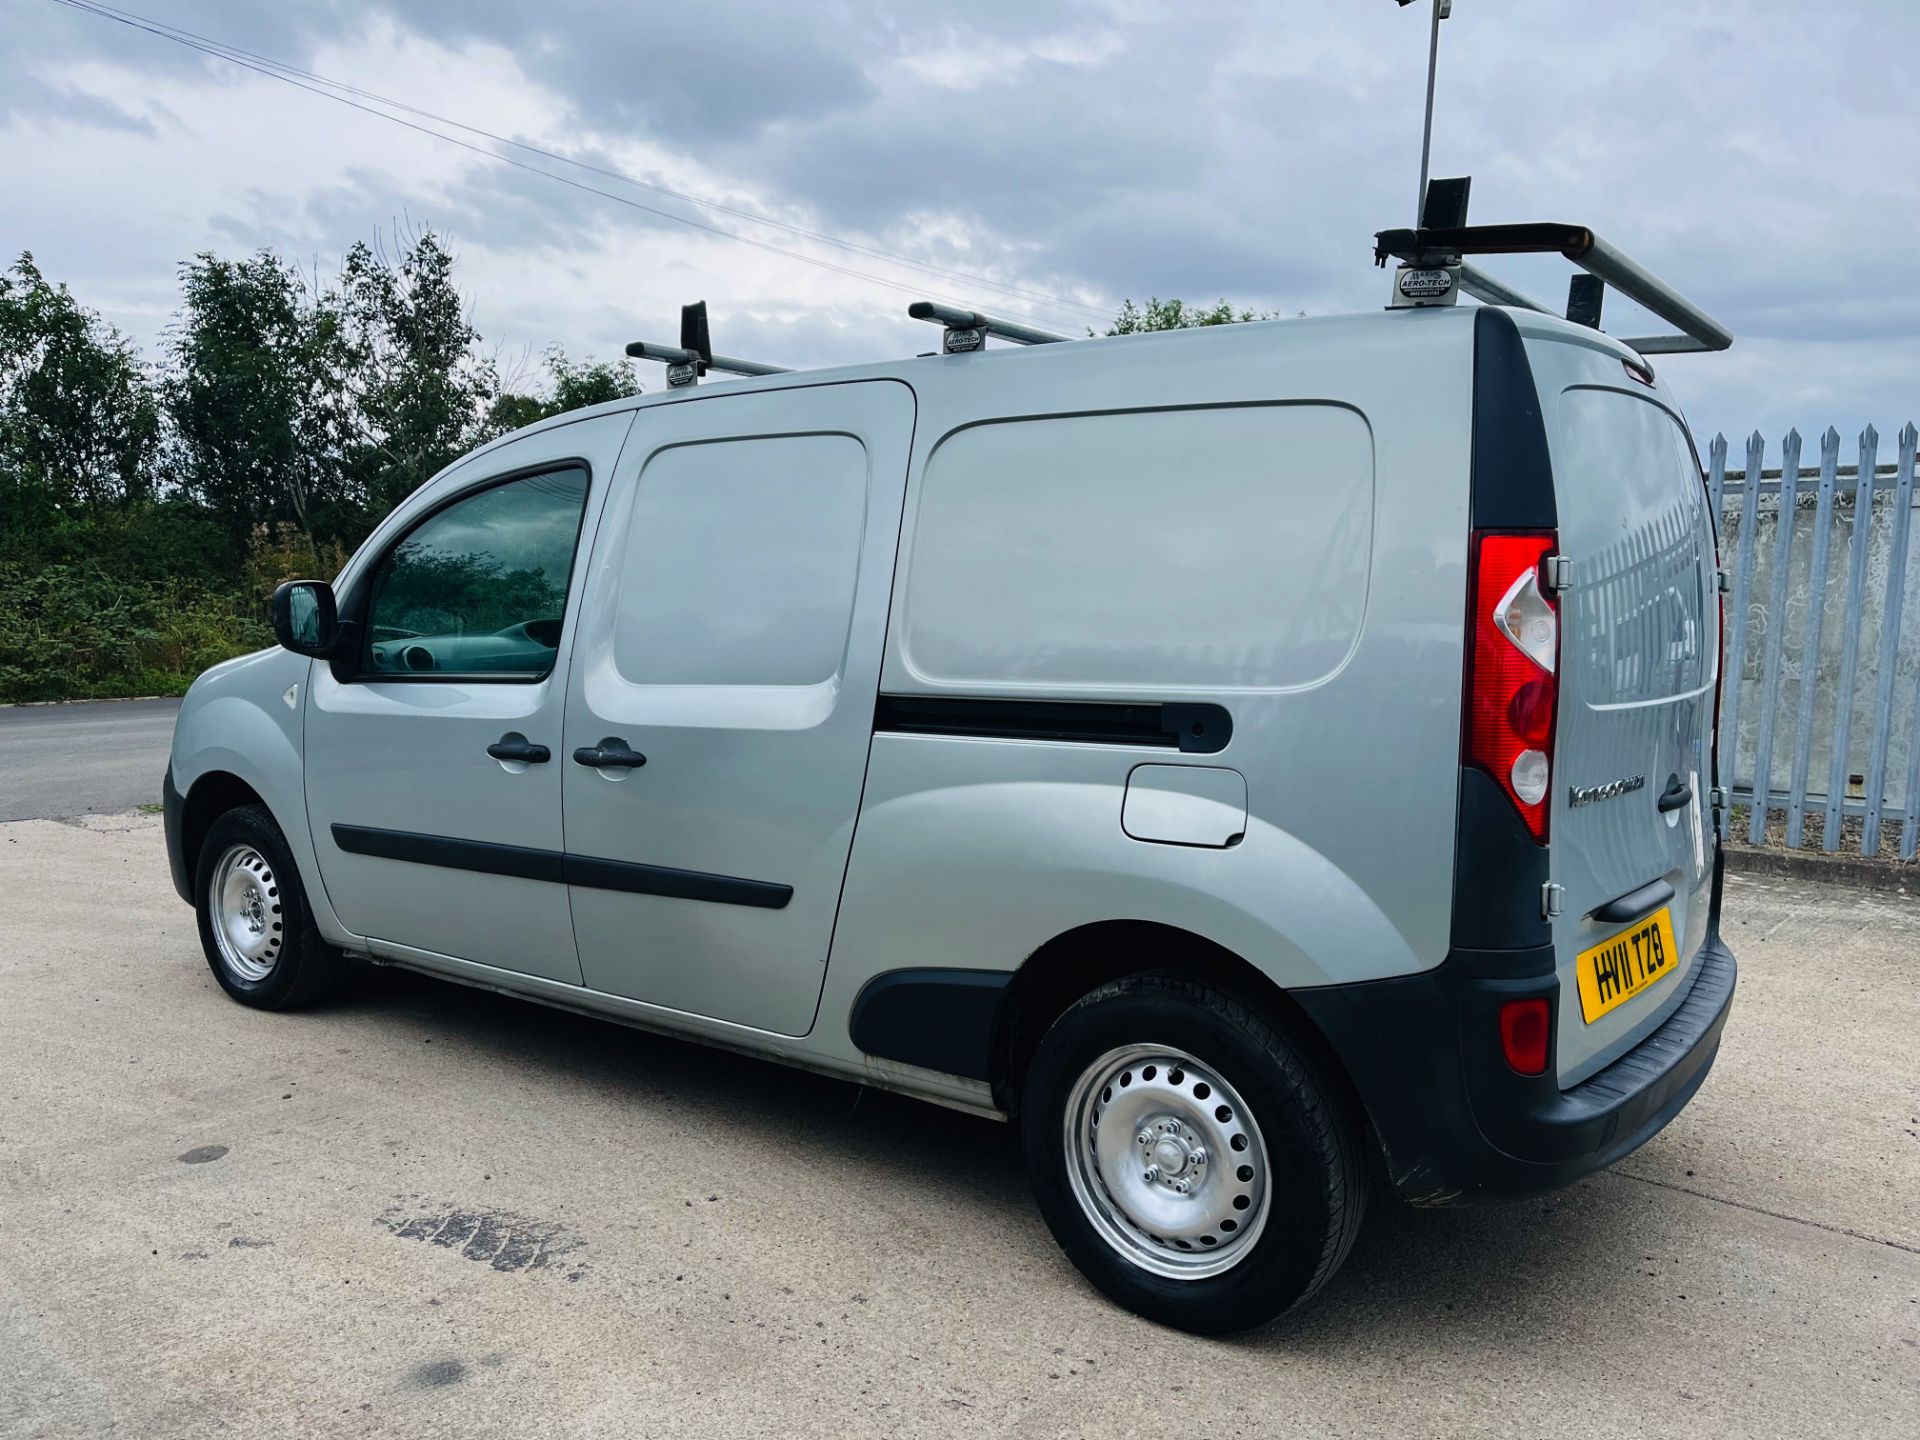 (Reserve Met) Renault Kangoo dci "Maxi Plus" 11reg - Rare and hard to find a Maxi Plus model -No Vat - Image 8 of 18